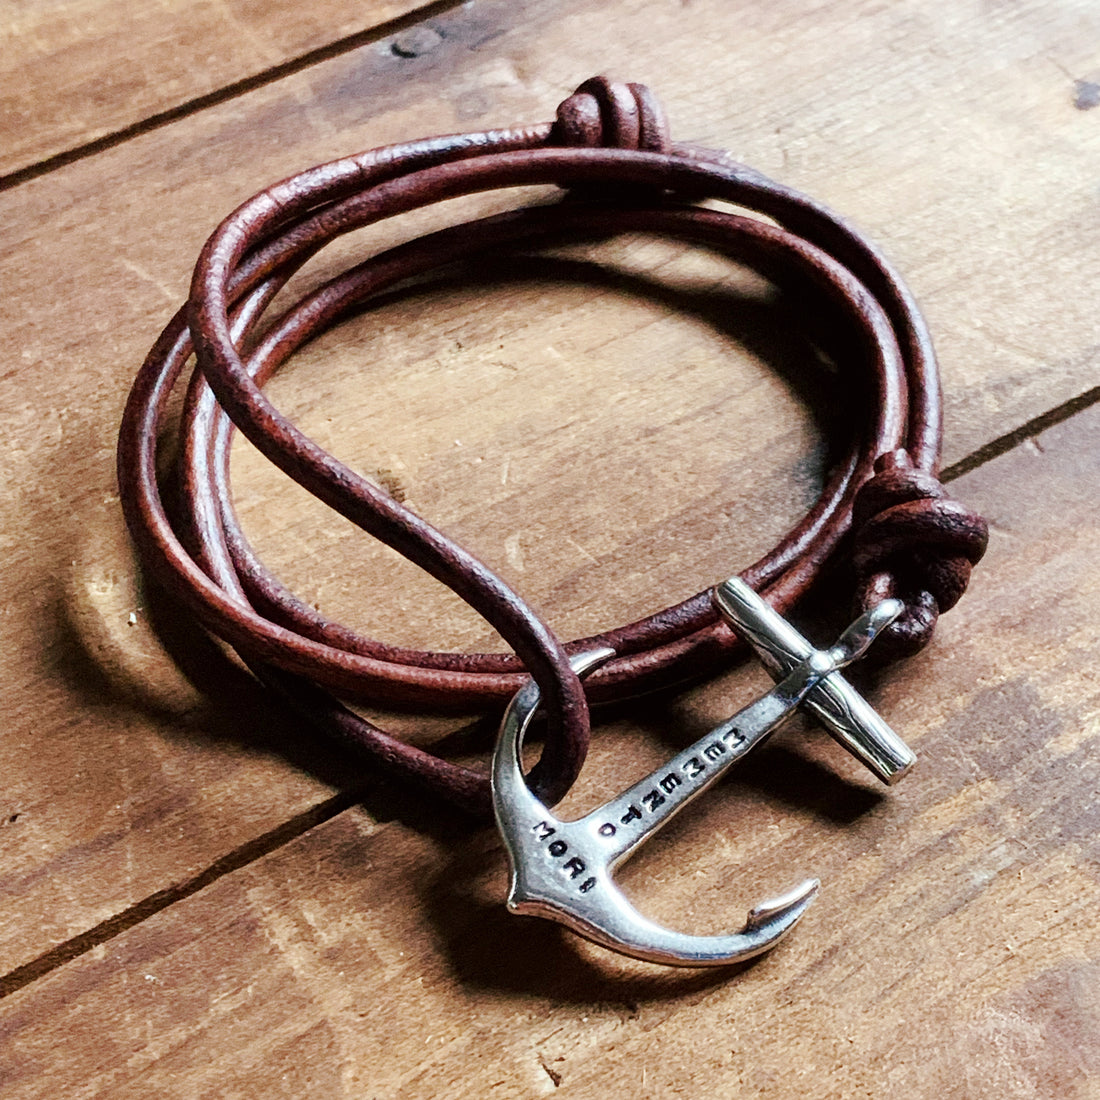 Handmade Anchor Bracelet with Cord and Leather